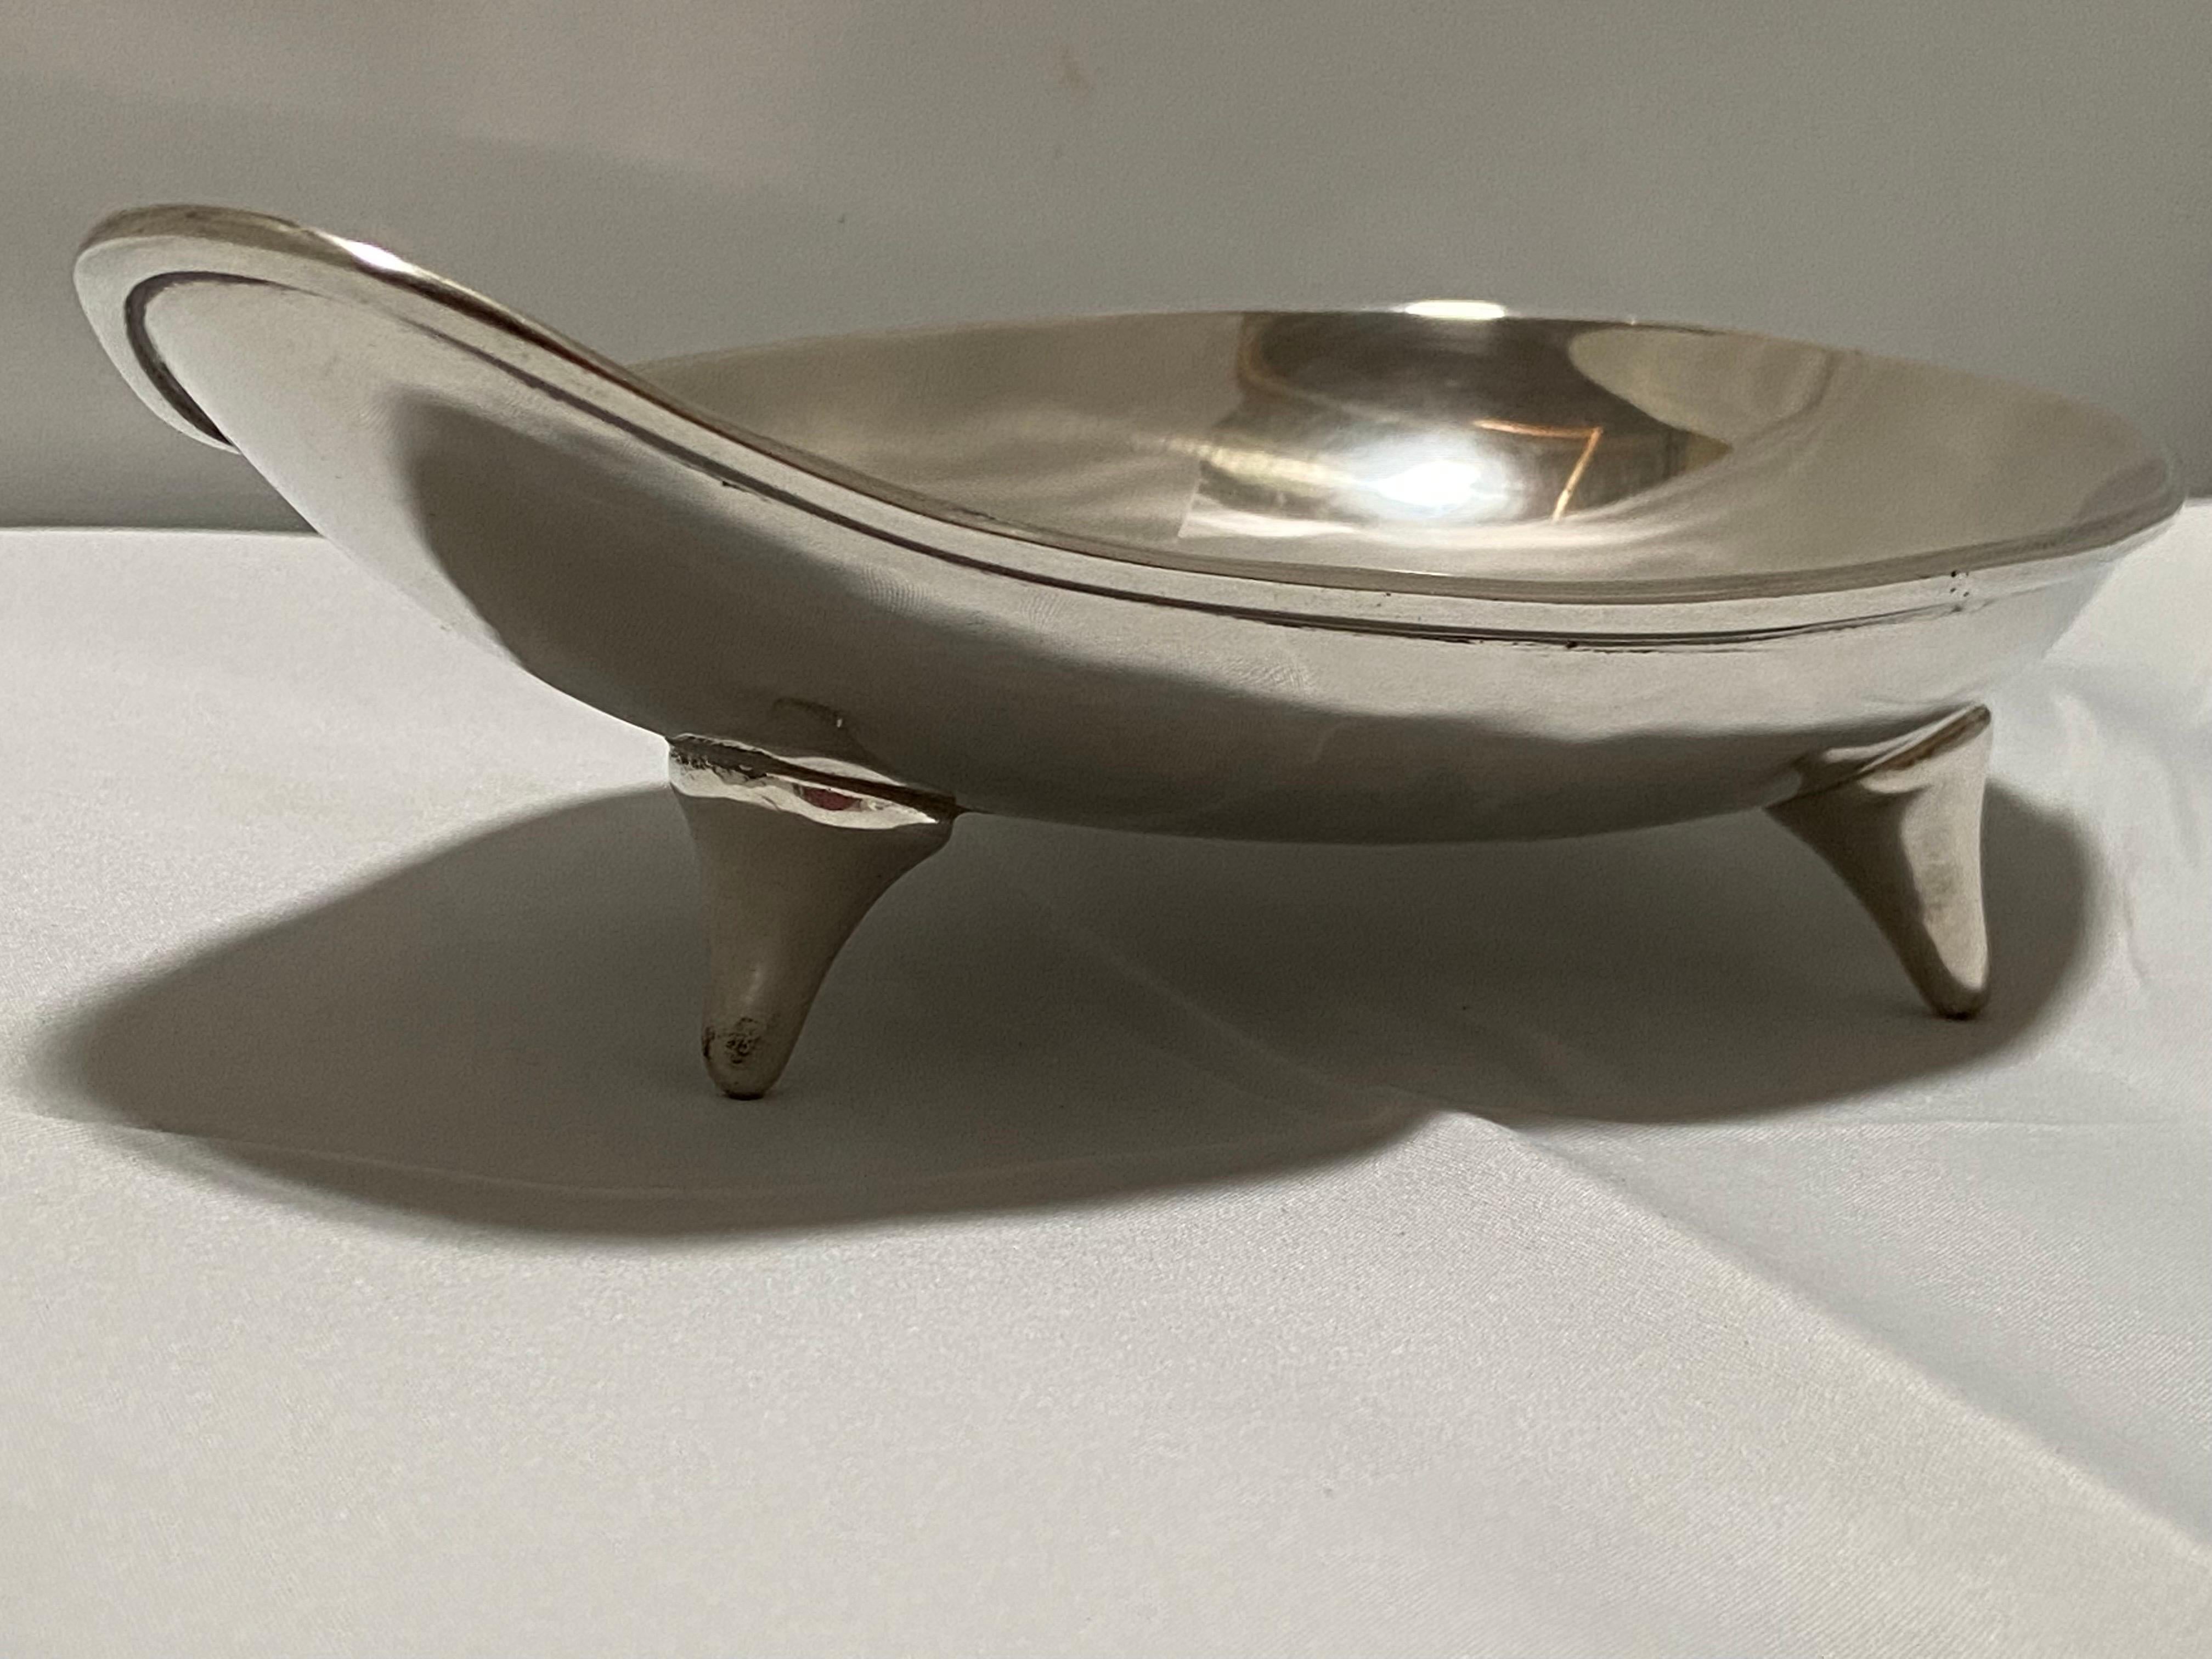 Vintage Mexican Mid-Century Modern Sterling Silver Footed Bowl or Dish by Zurita For Sale 2